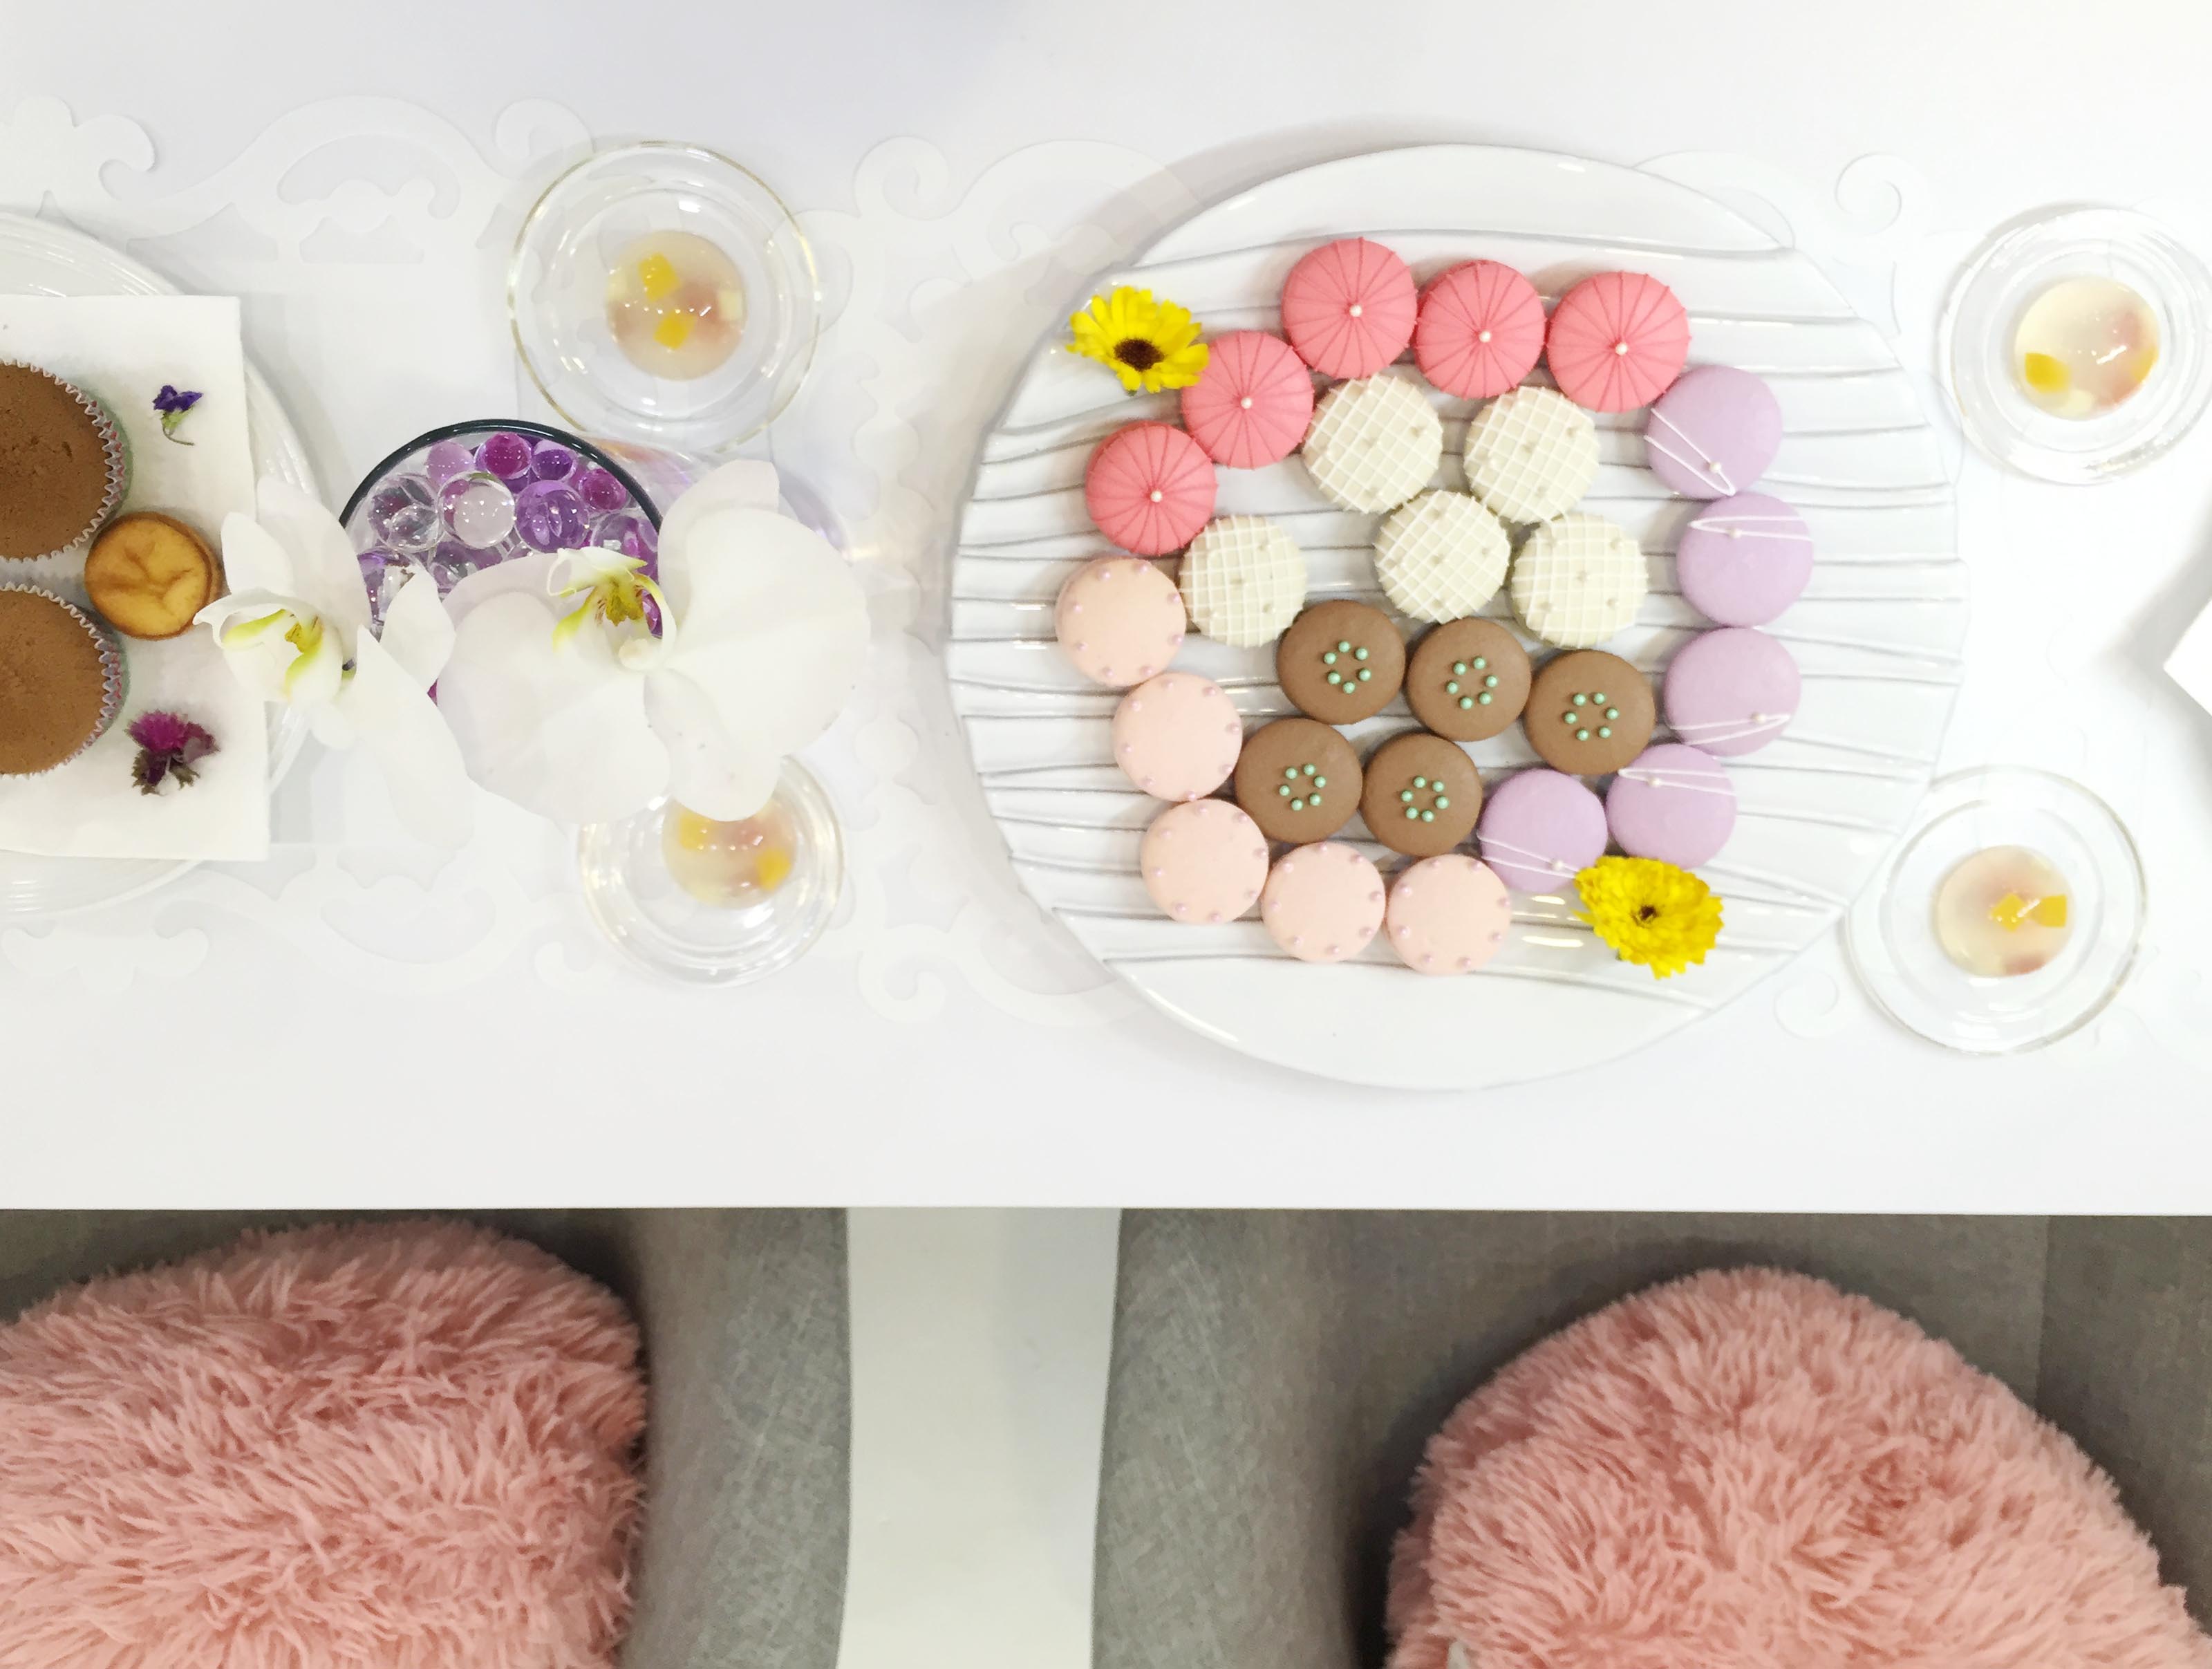 Macaroons and sweets